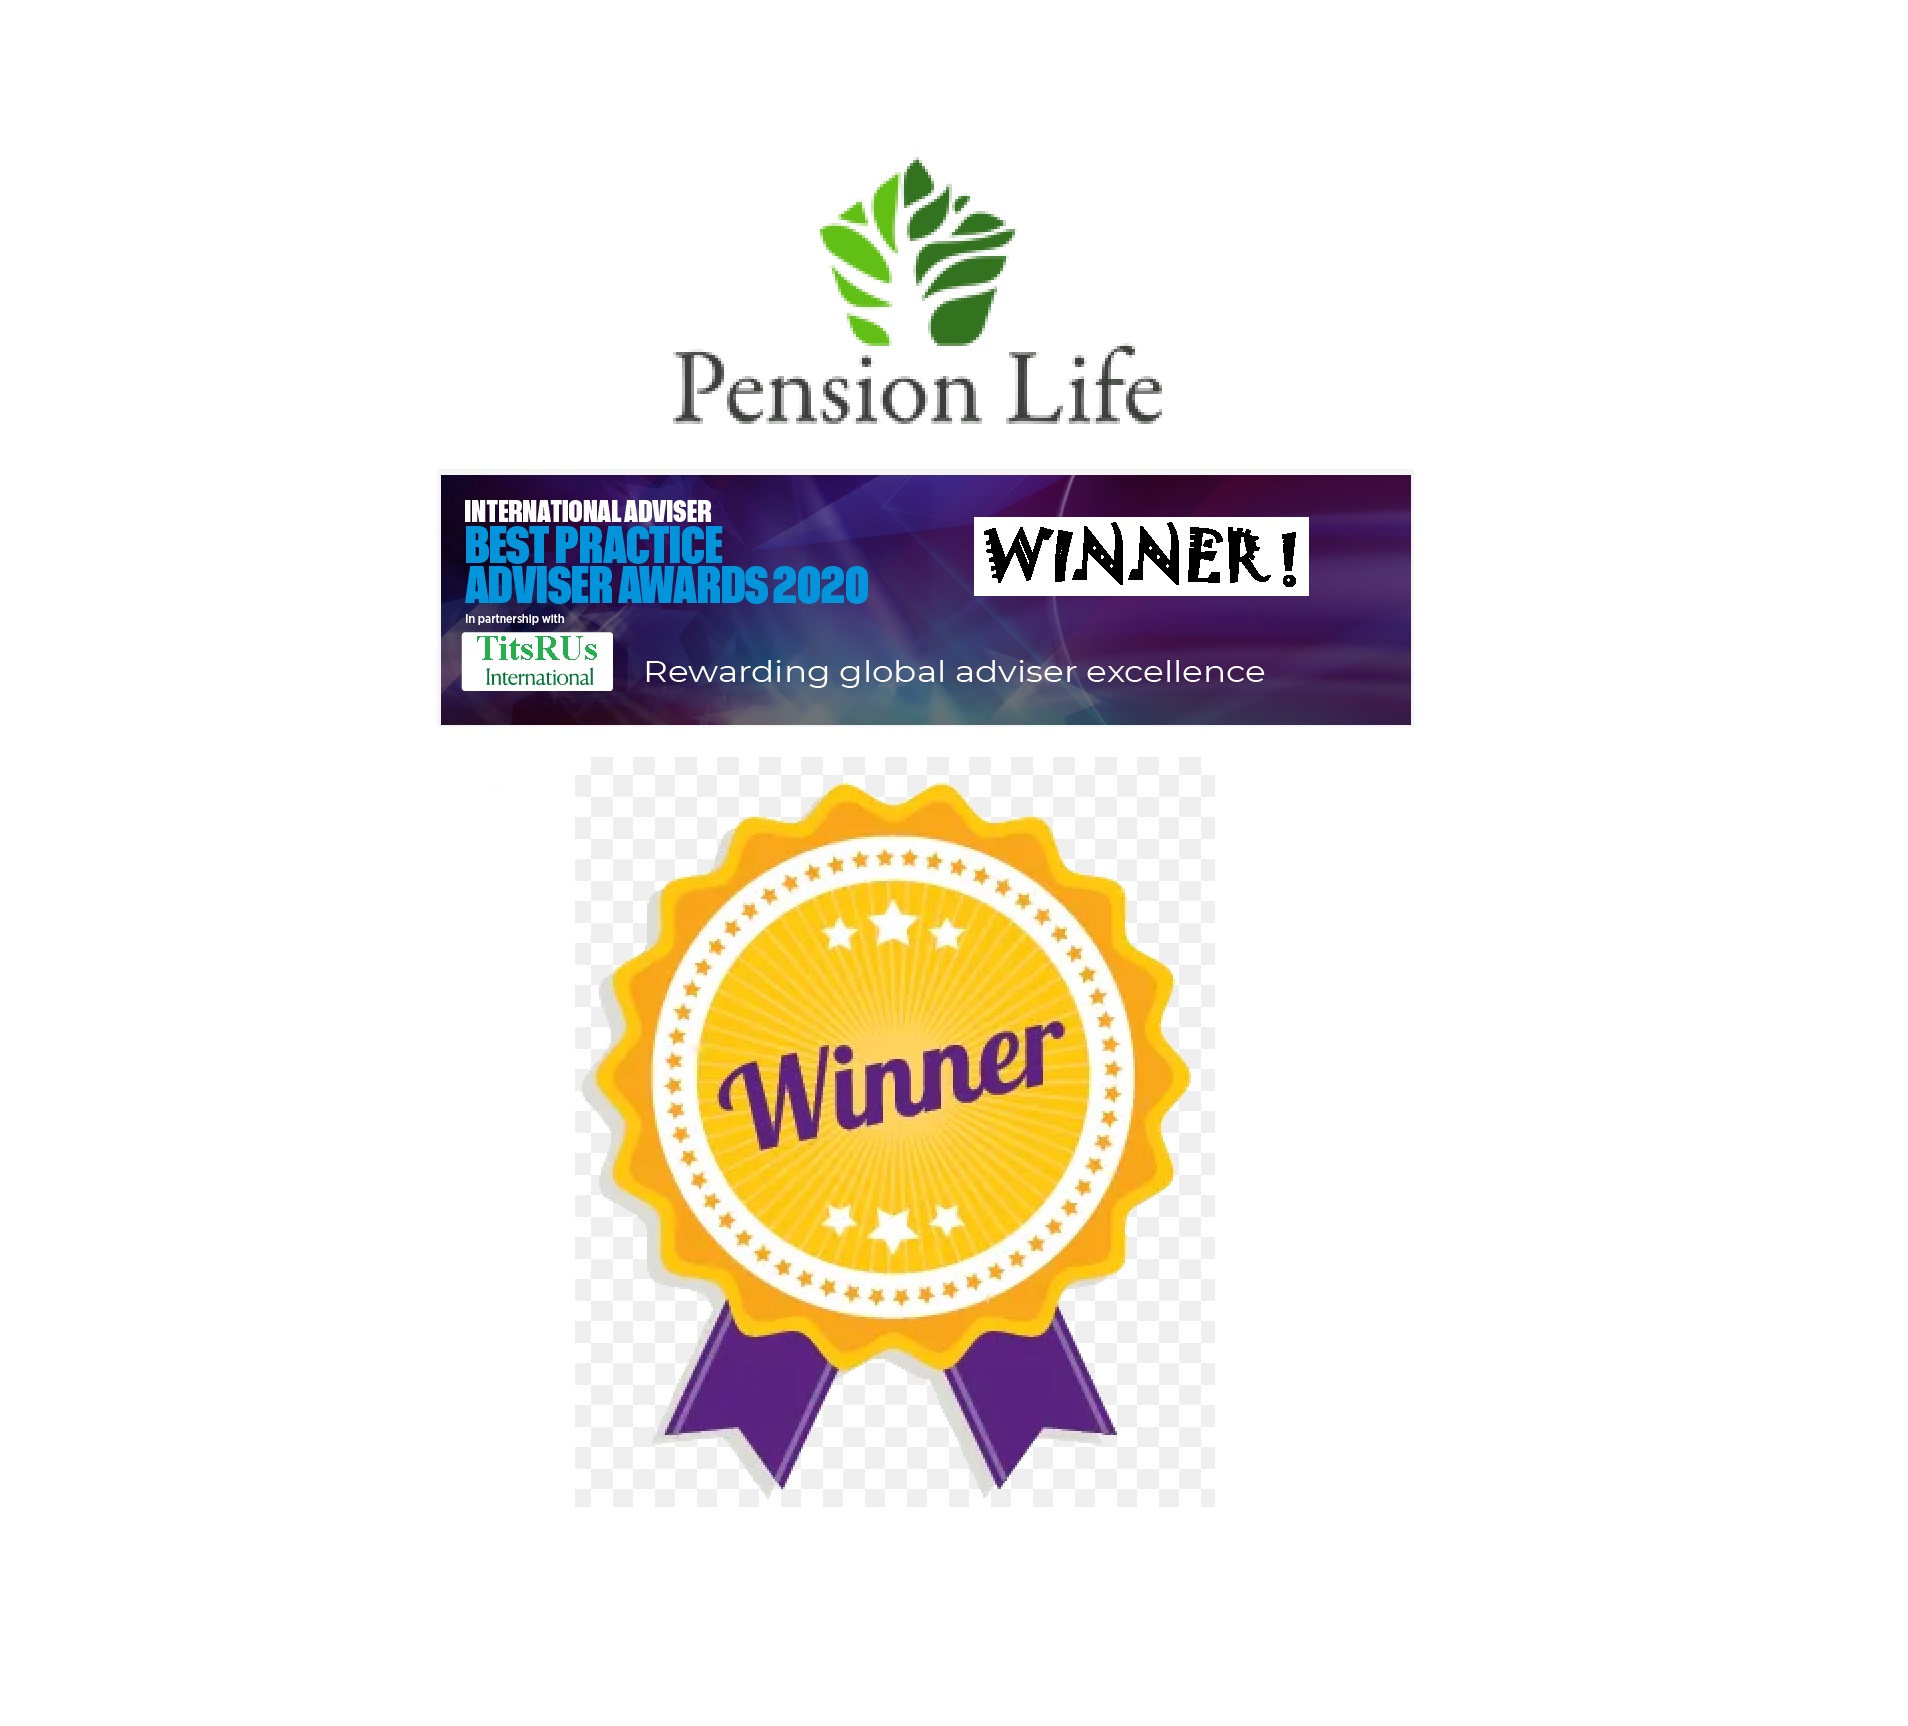 International Adviser invites Pension Life to enter the Best Practice Adviser Awards in partnership with Quilter International